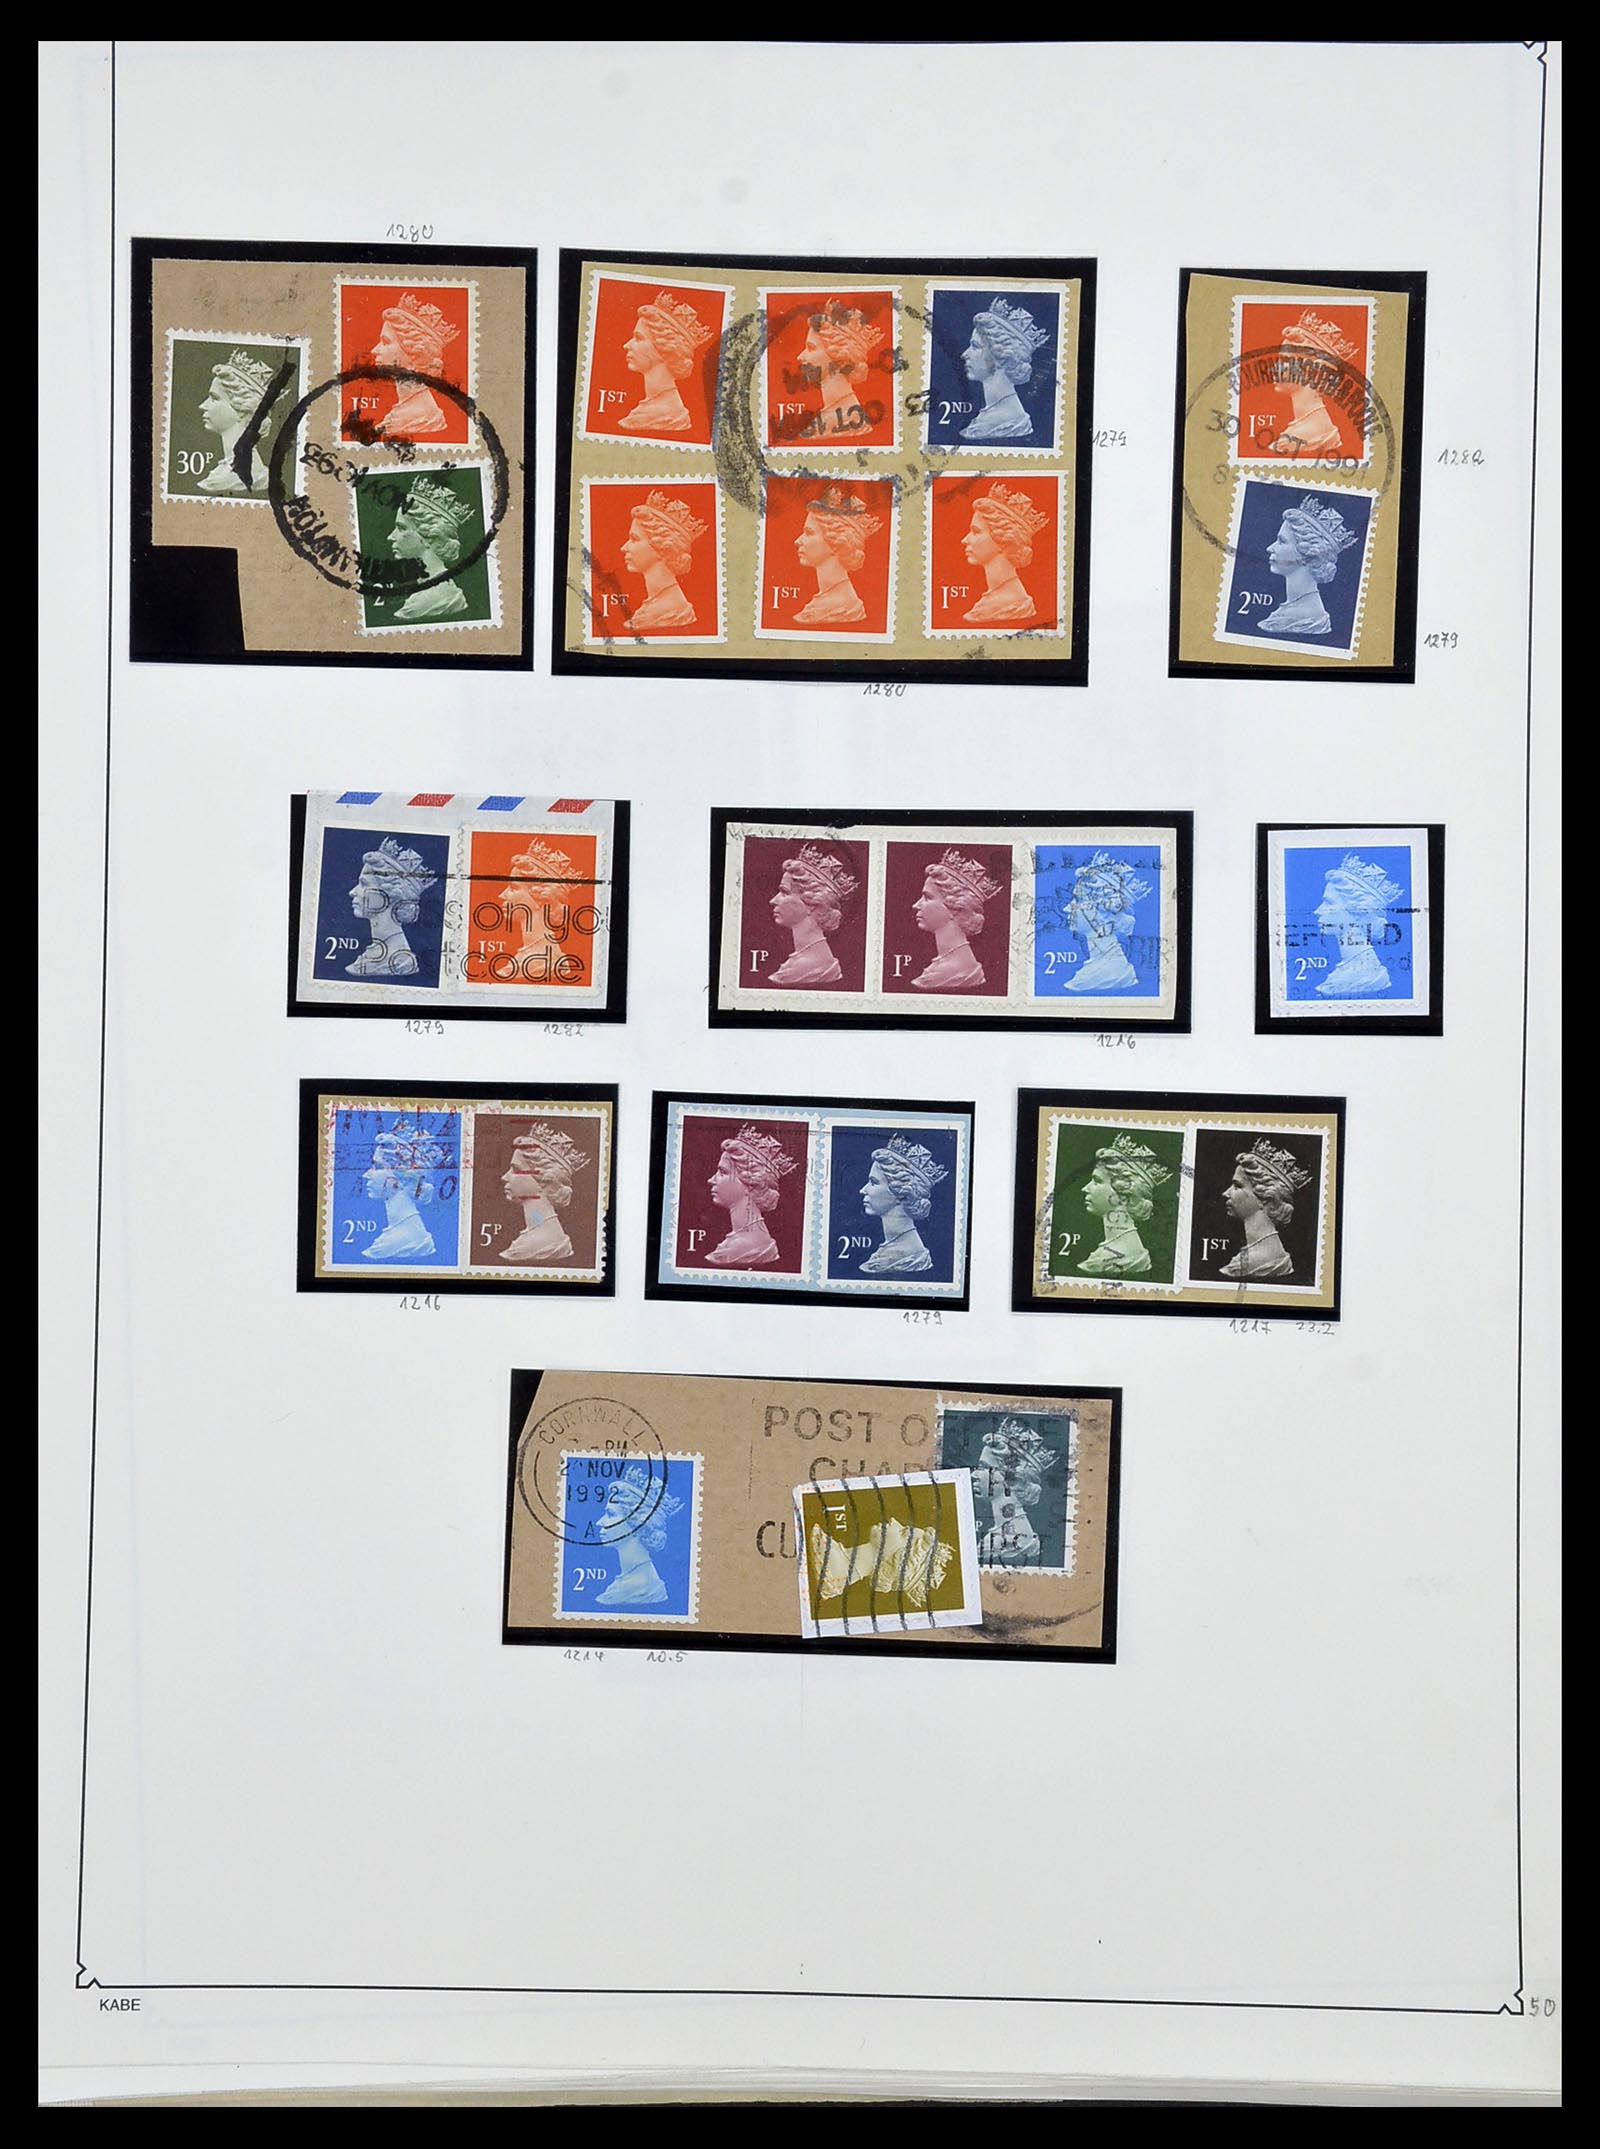 34221 061 - Stamp collection 34221 Great Britain Machins/castles 1971-2005.